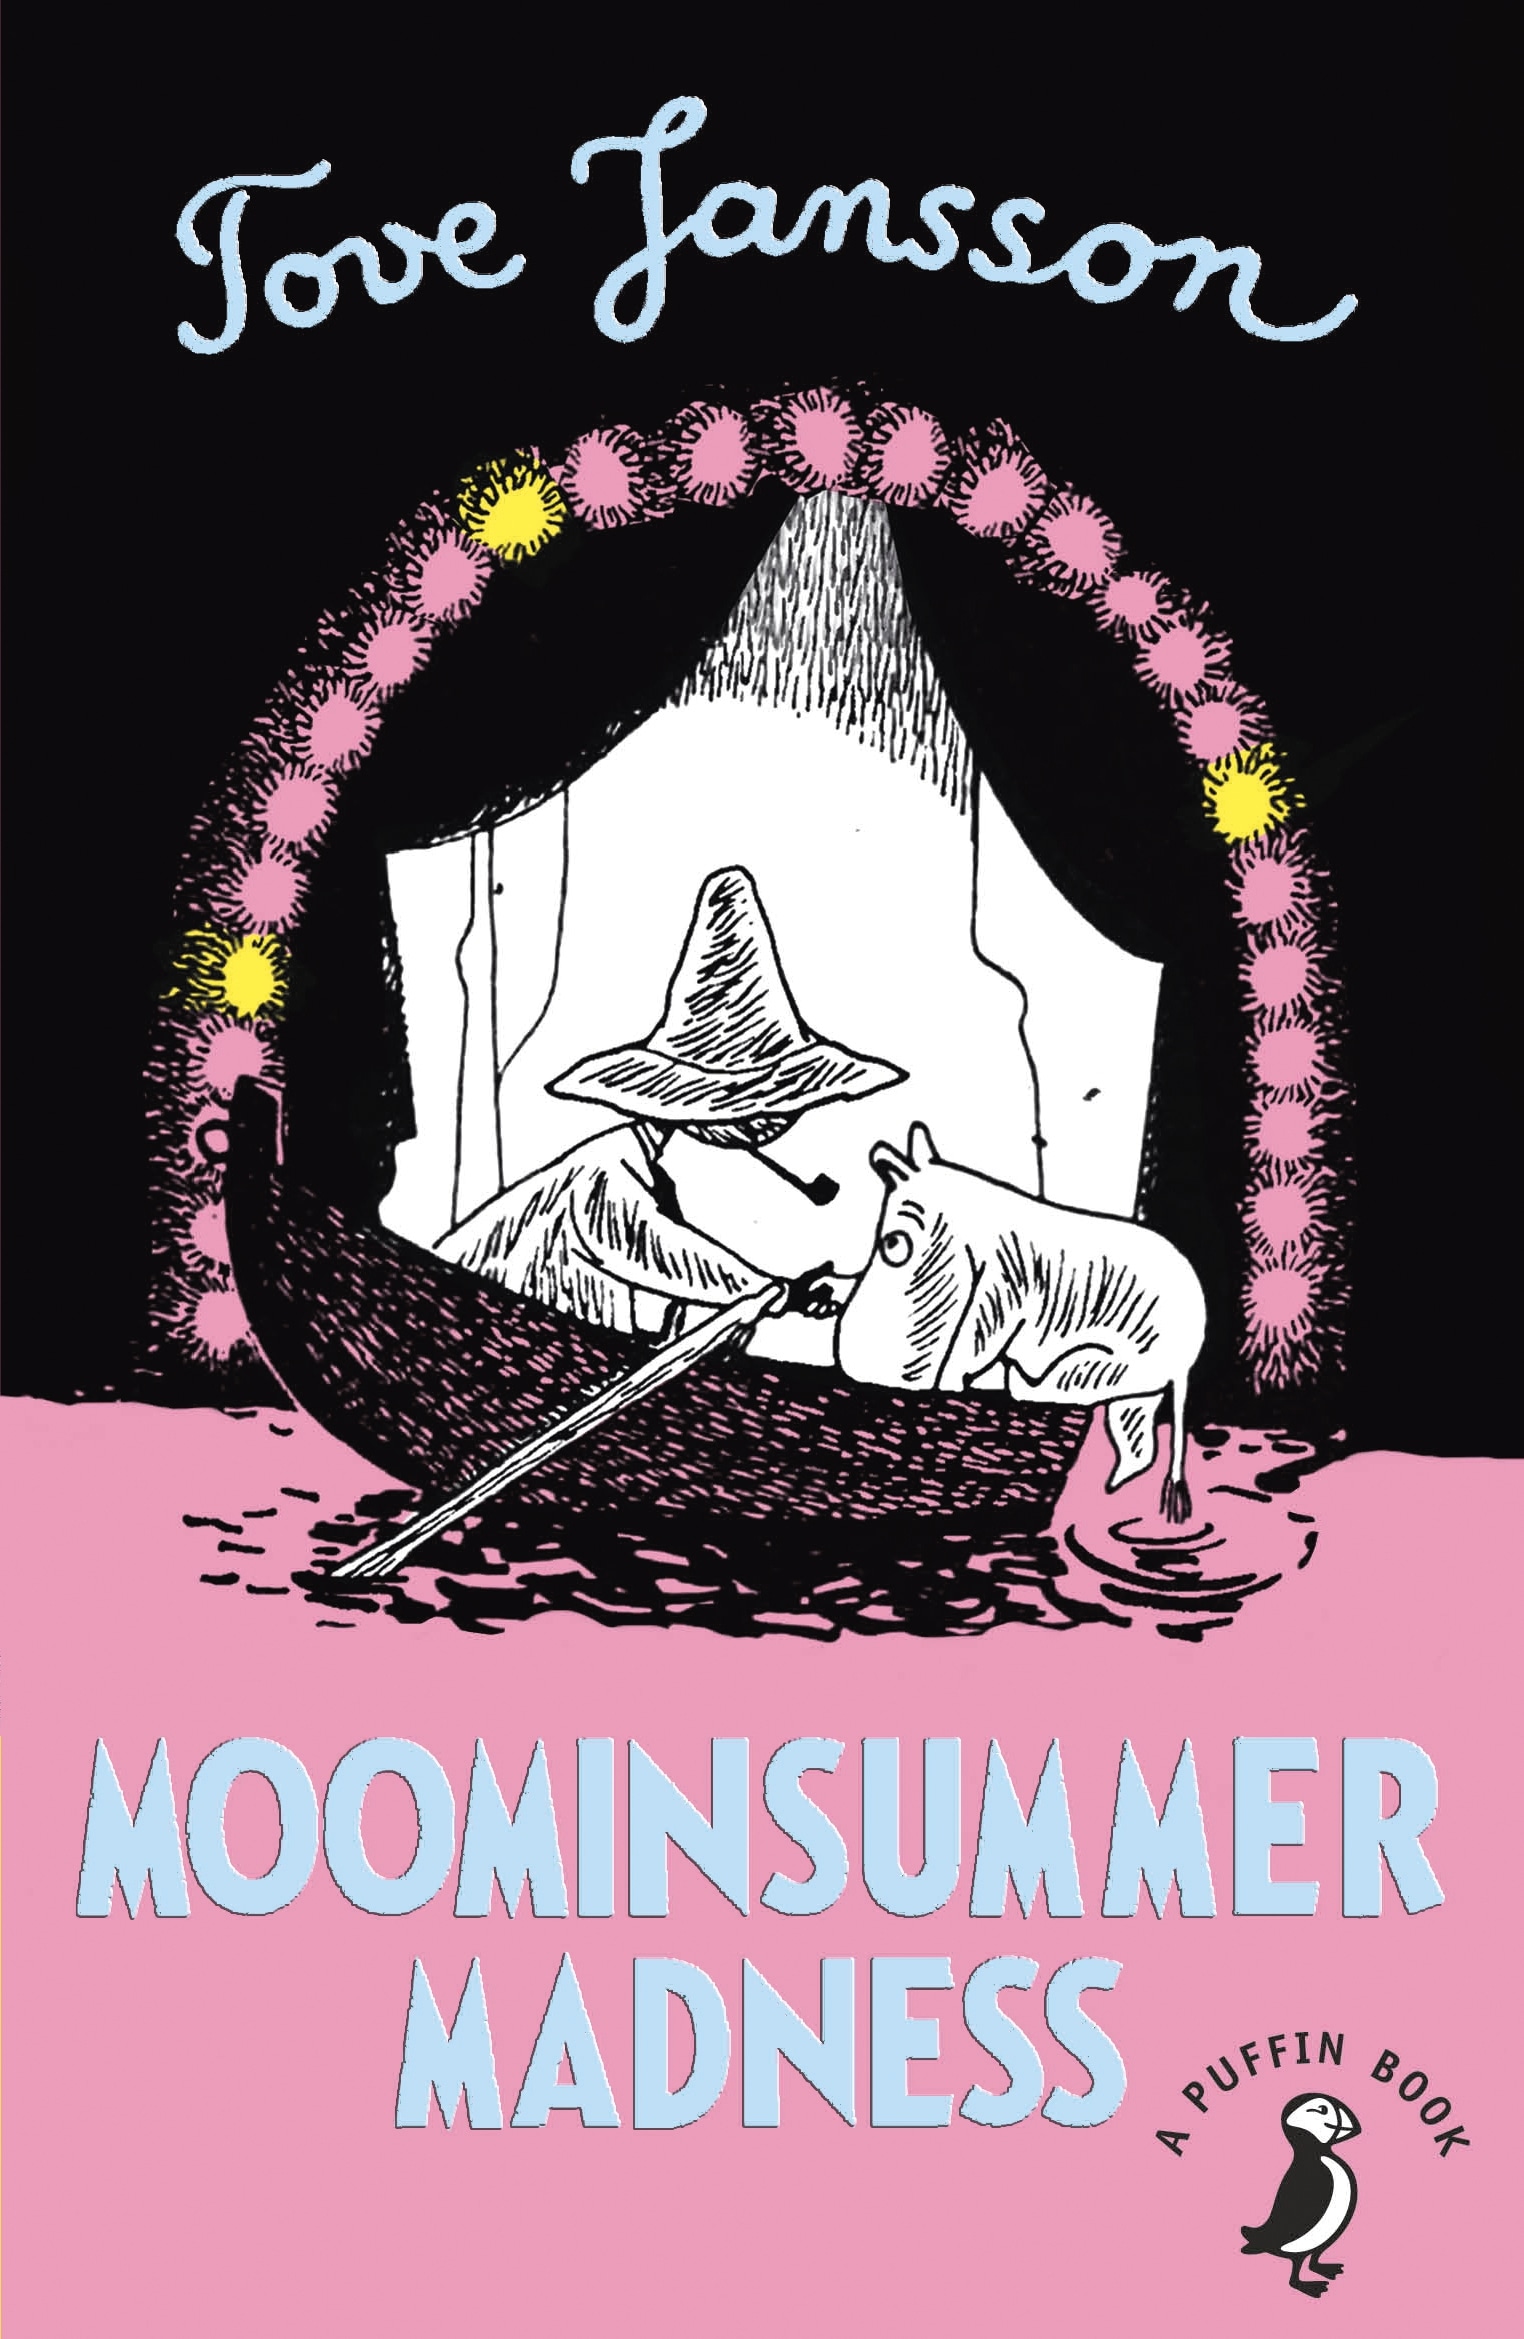 Book “Moominsummer Madness” by Tove Jansson — February 7, 2019